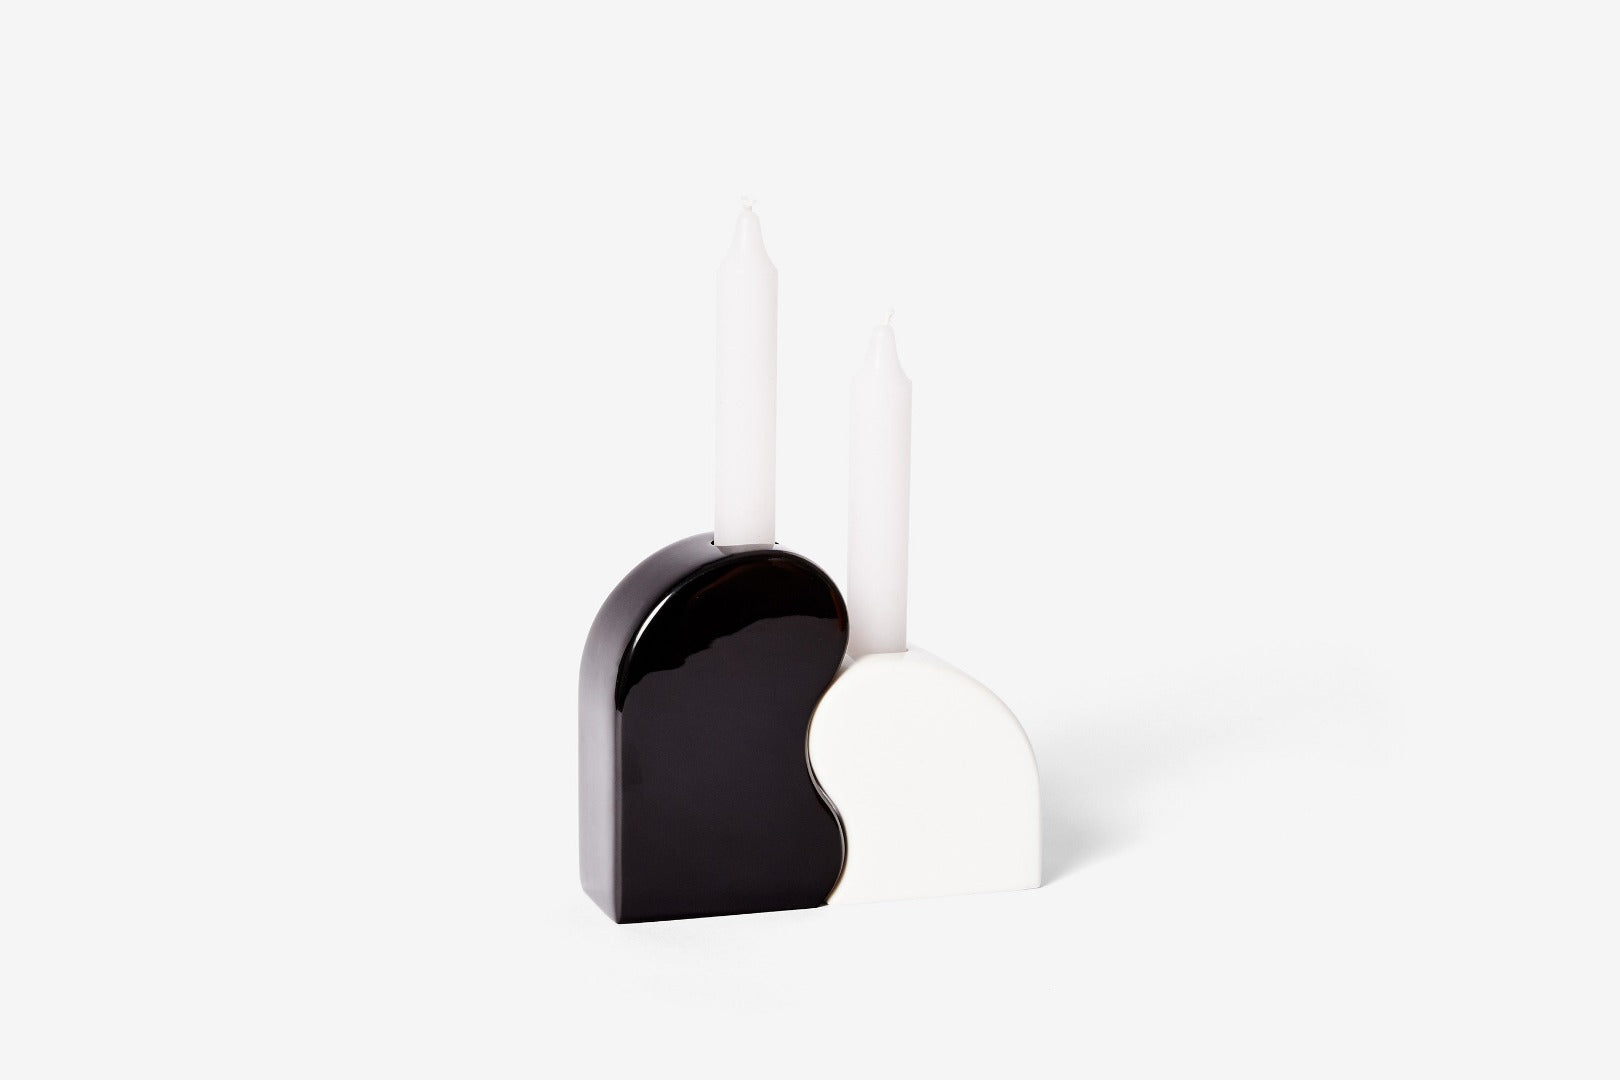 curved black and white candle holders which fit together - two unlit white candles are in them